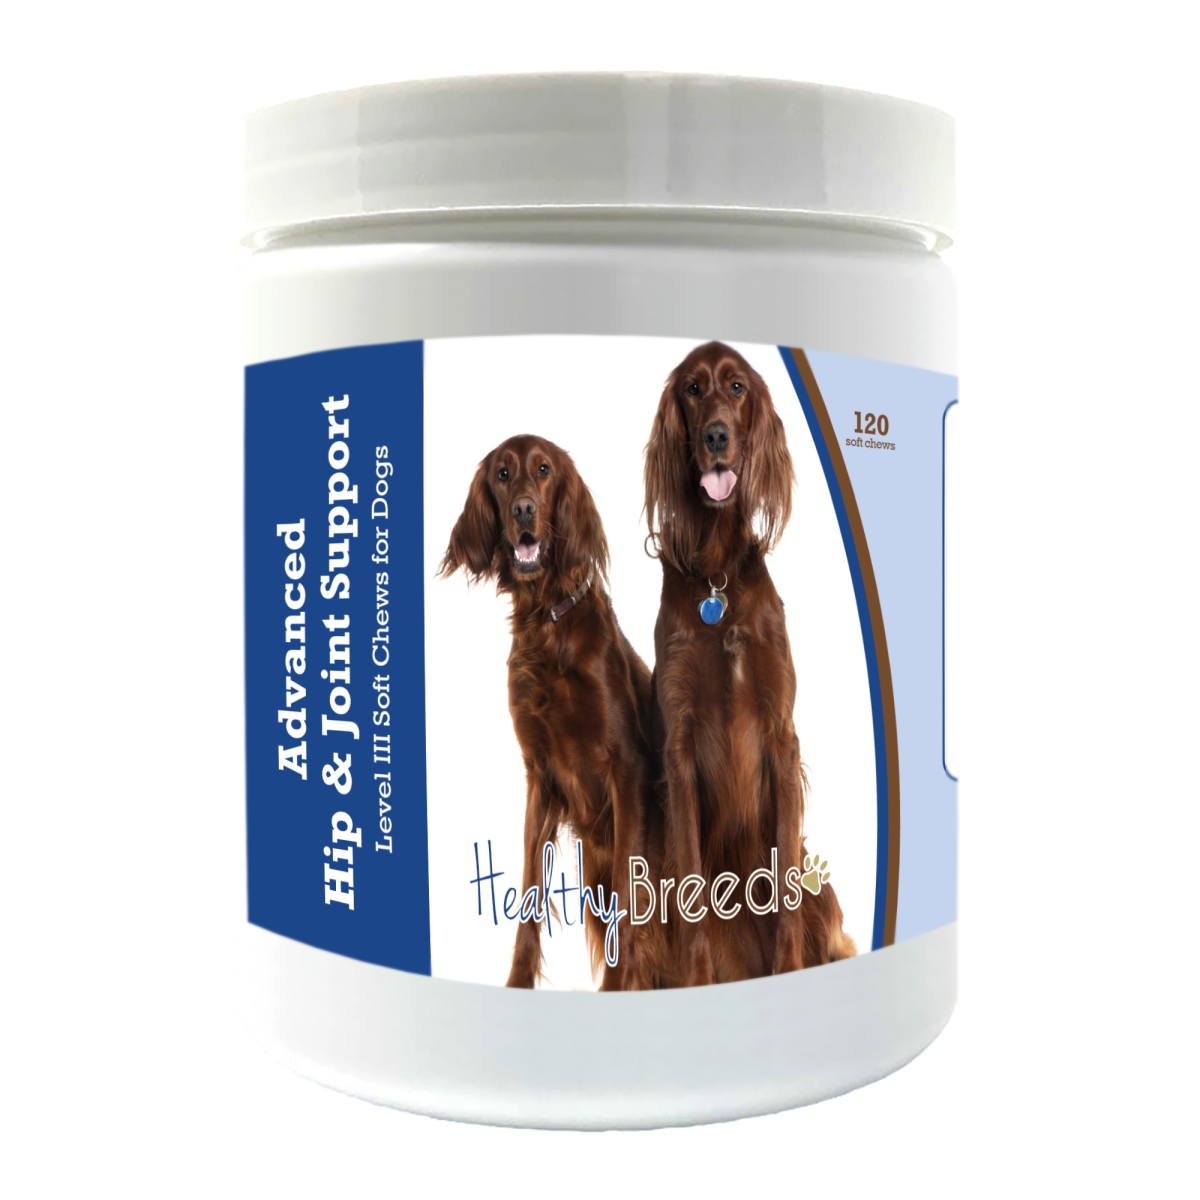 Picture of Healthy Breeds 192959898453 Irish Setter Advanced Hip & Joint Support Level III Soft Chews for Dogs